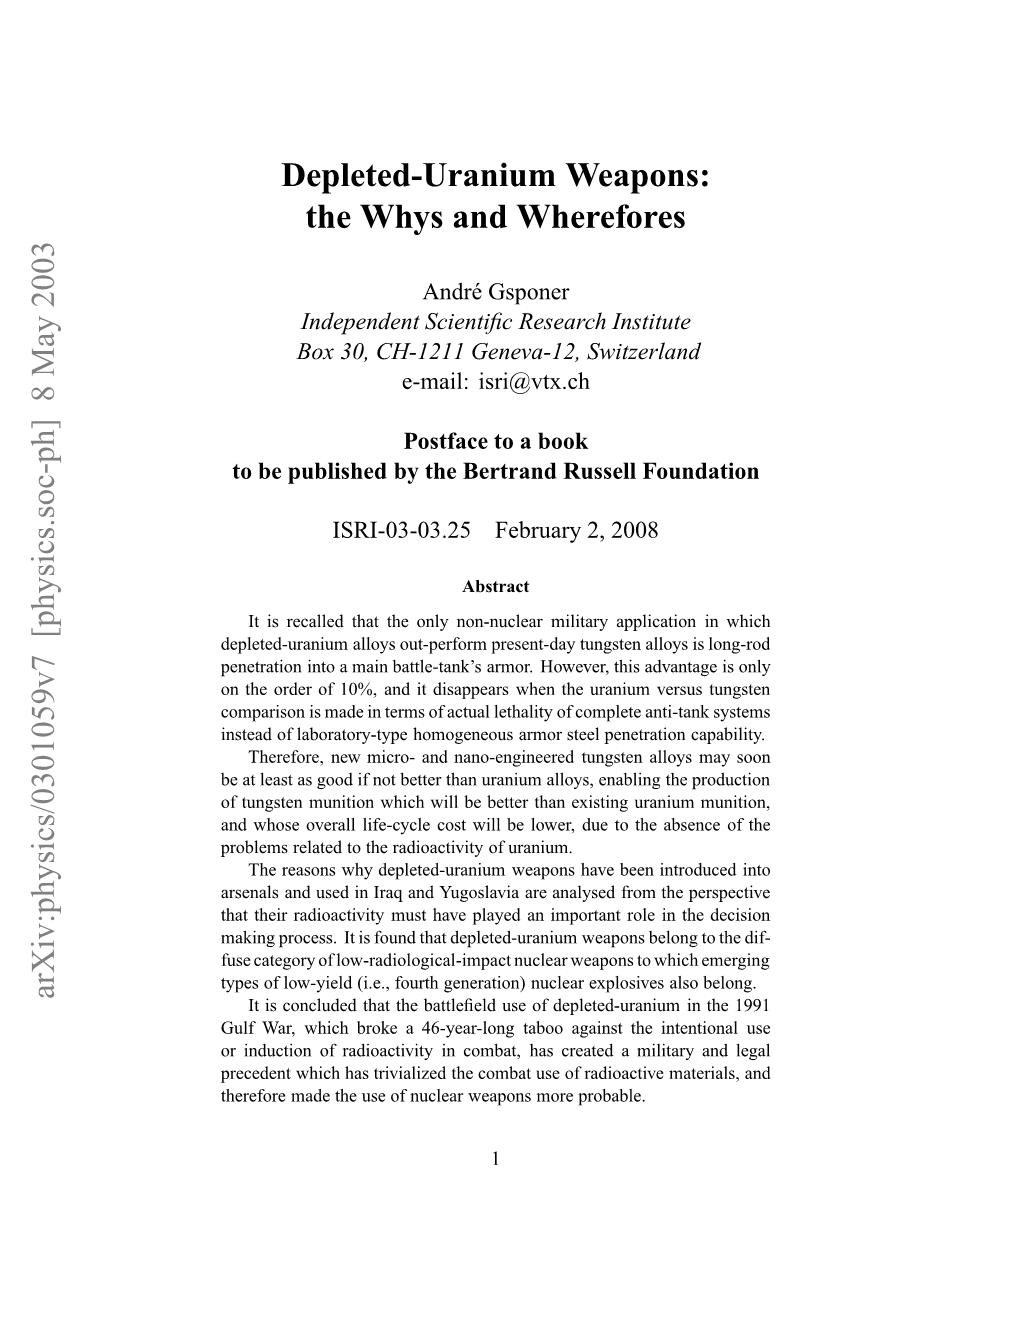 Depleted-Uranium Weapons: the Whys and Wherefores